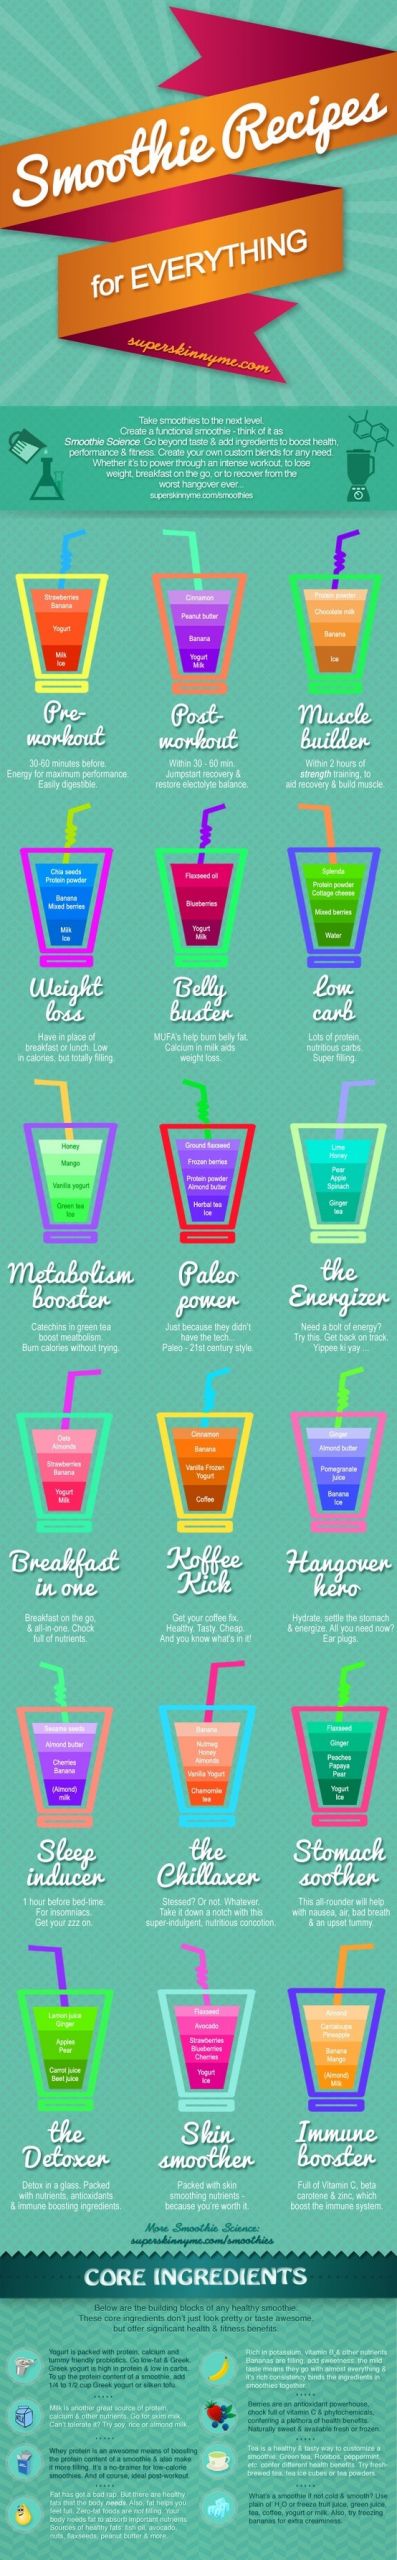 Pre Made Smoothies For Weight Loss
 Pin on oiledforhealth